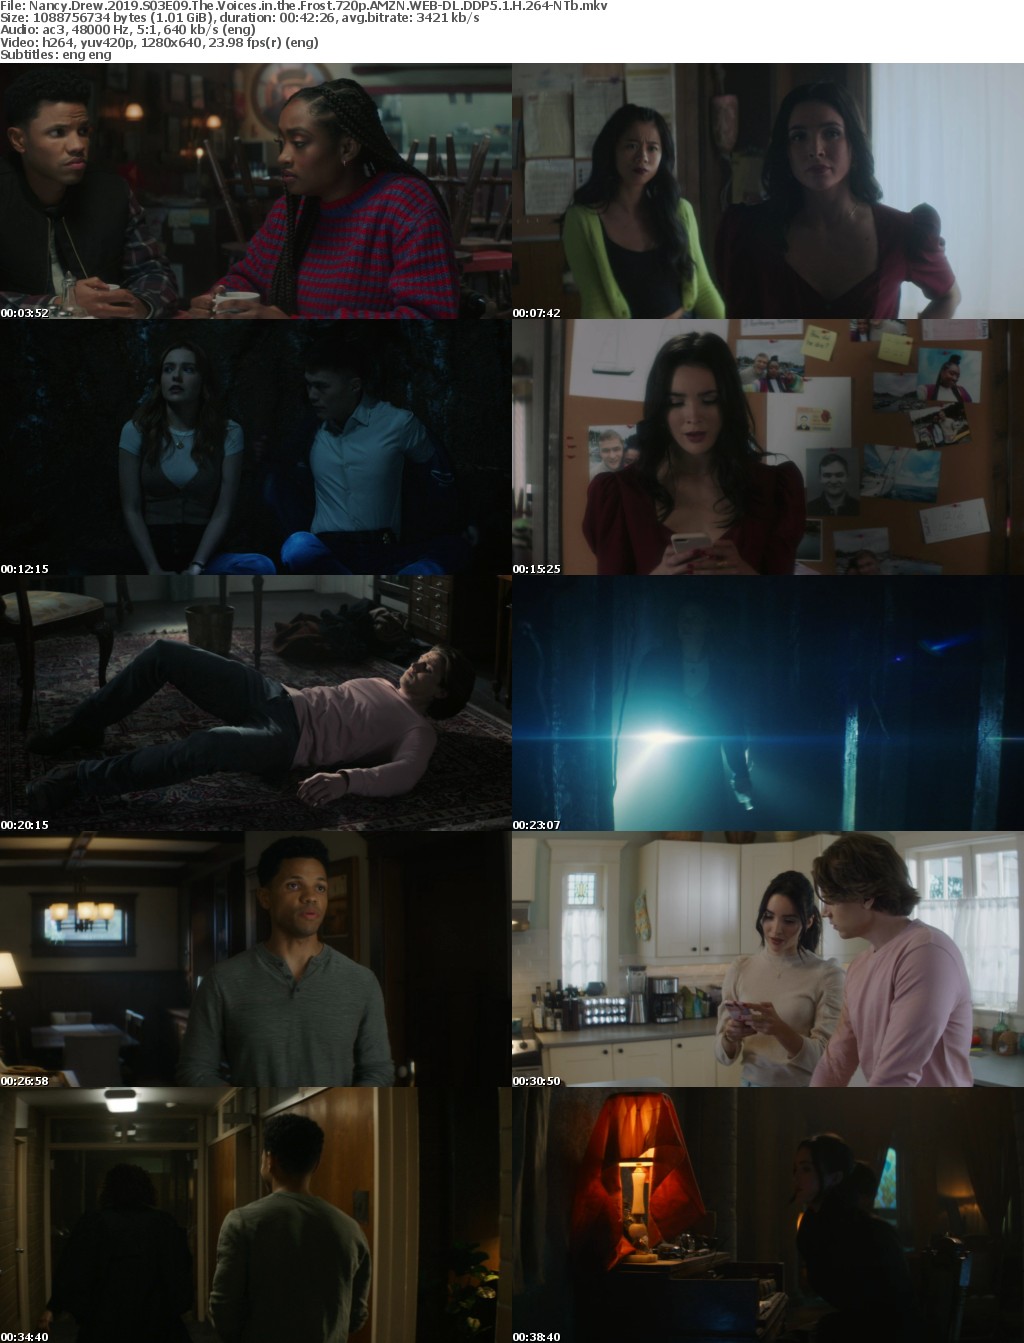 Nancy Drew 2019 S03E09 The Voices in the Frost 720p AMZN WEBRip DDP5 1 x264-NTb